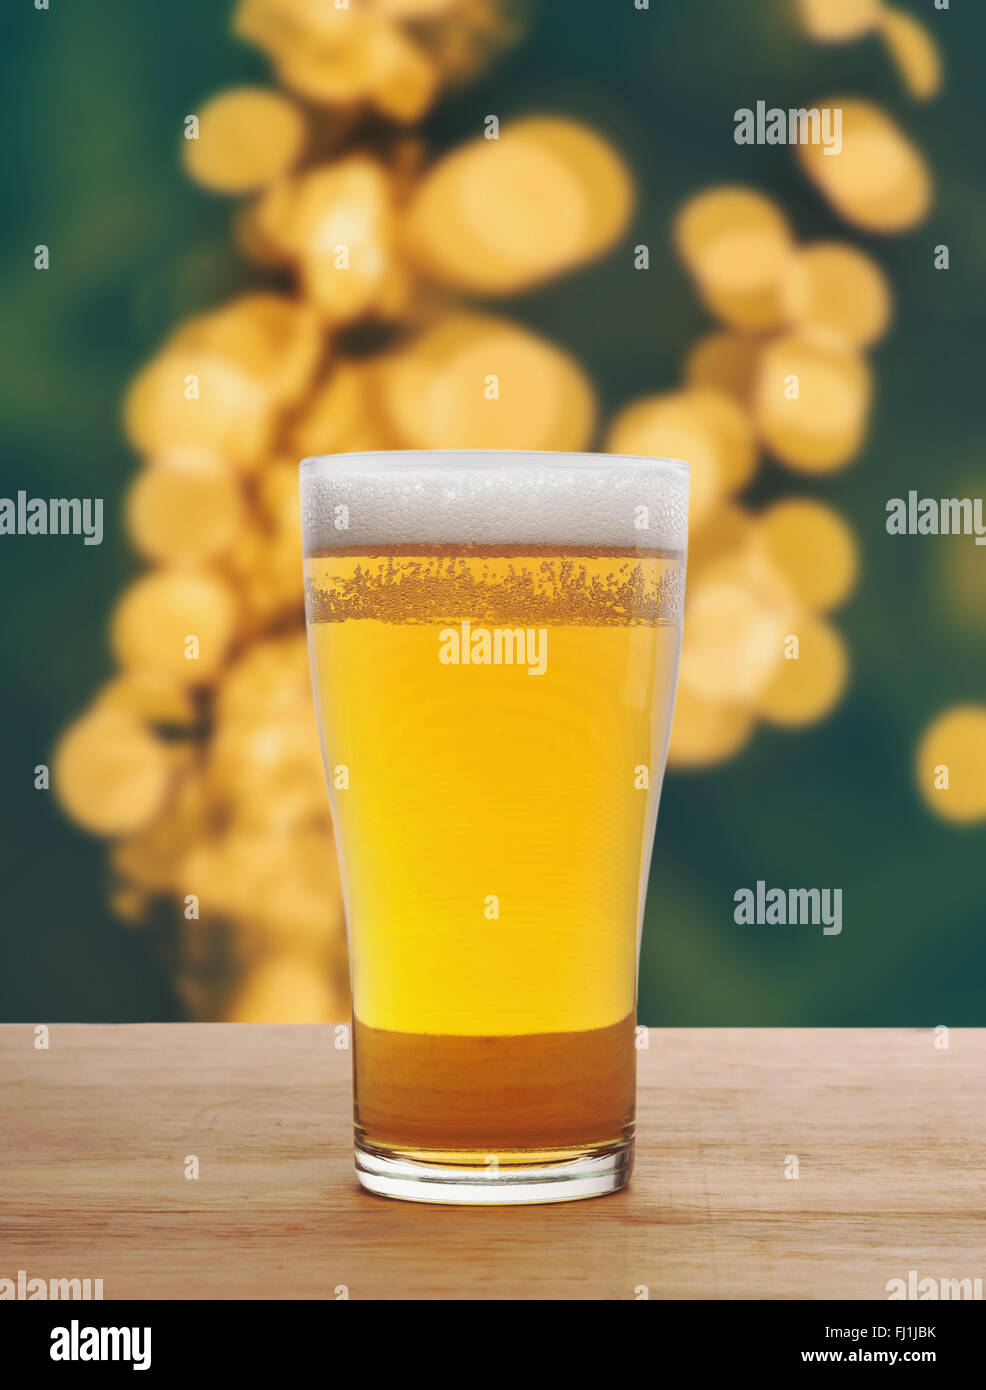 Glass of beer on wooden in light bokeh blurred background Stock Photo